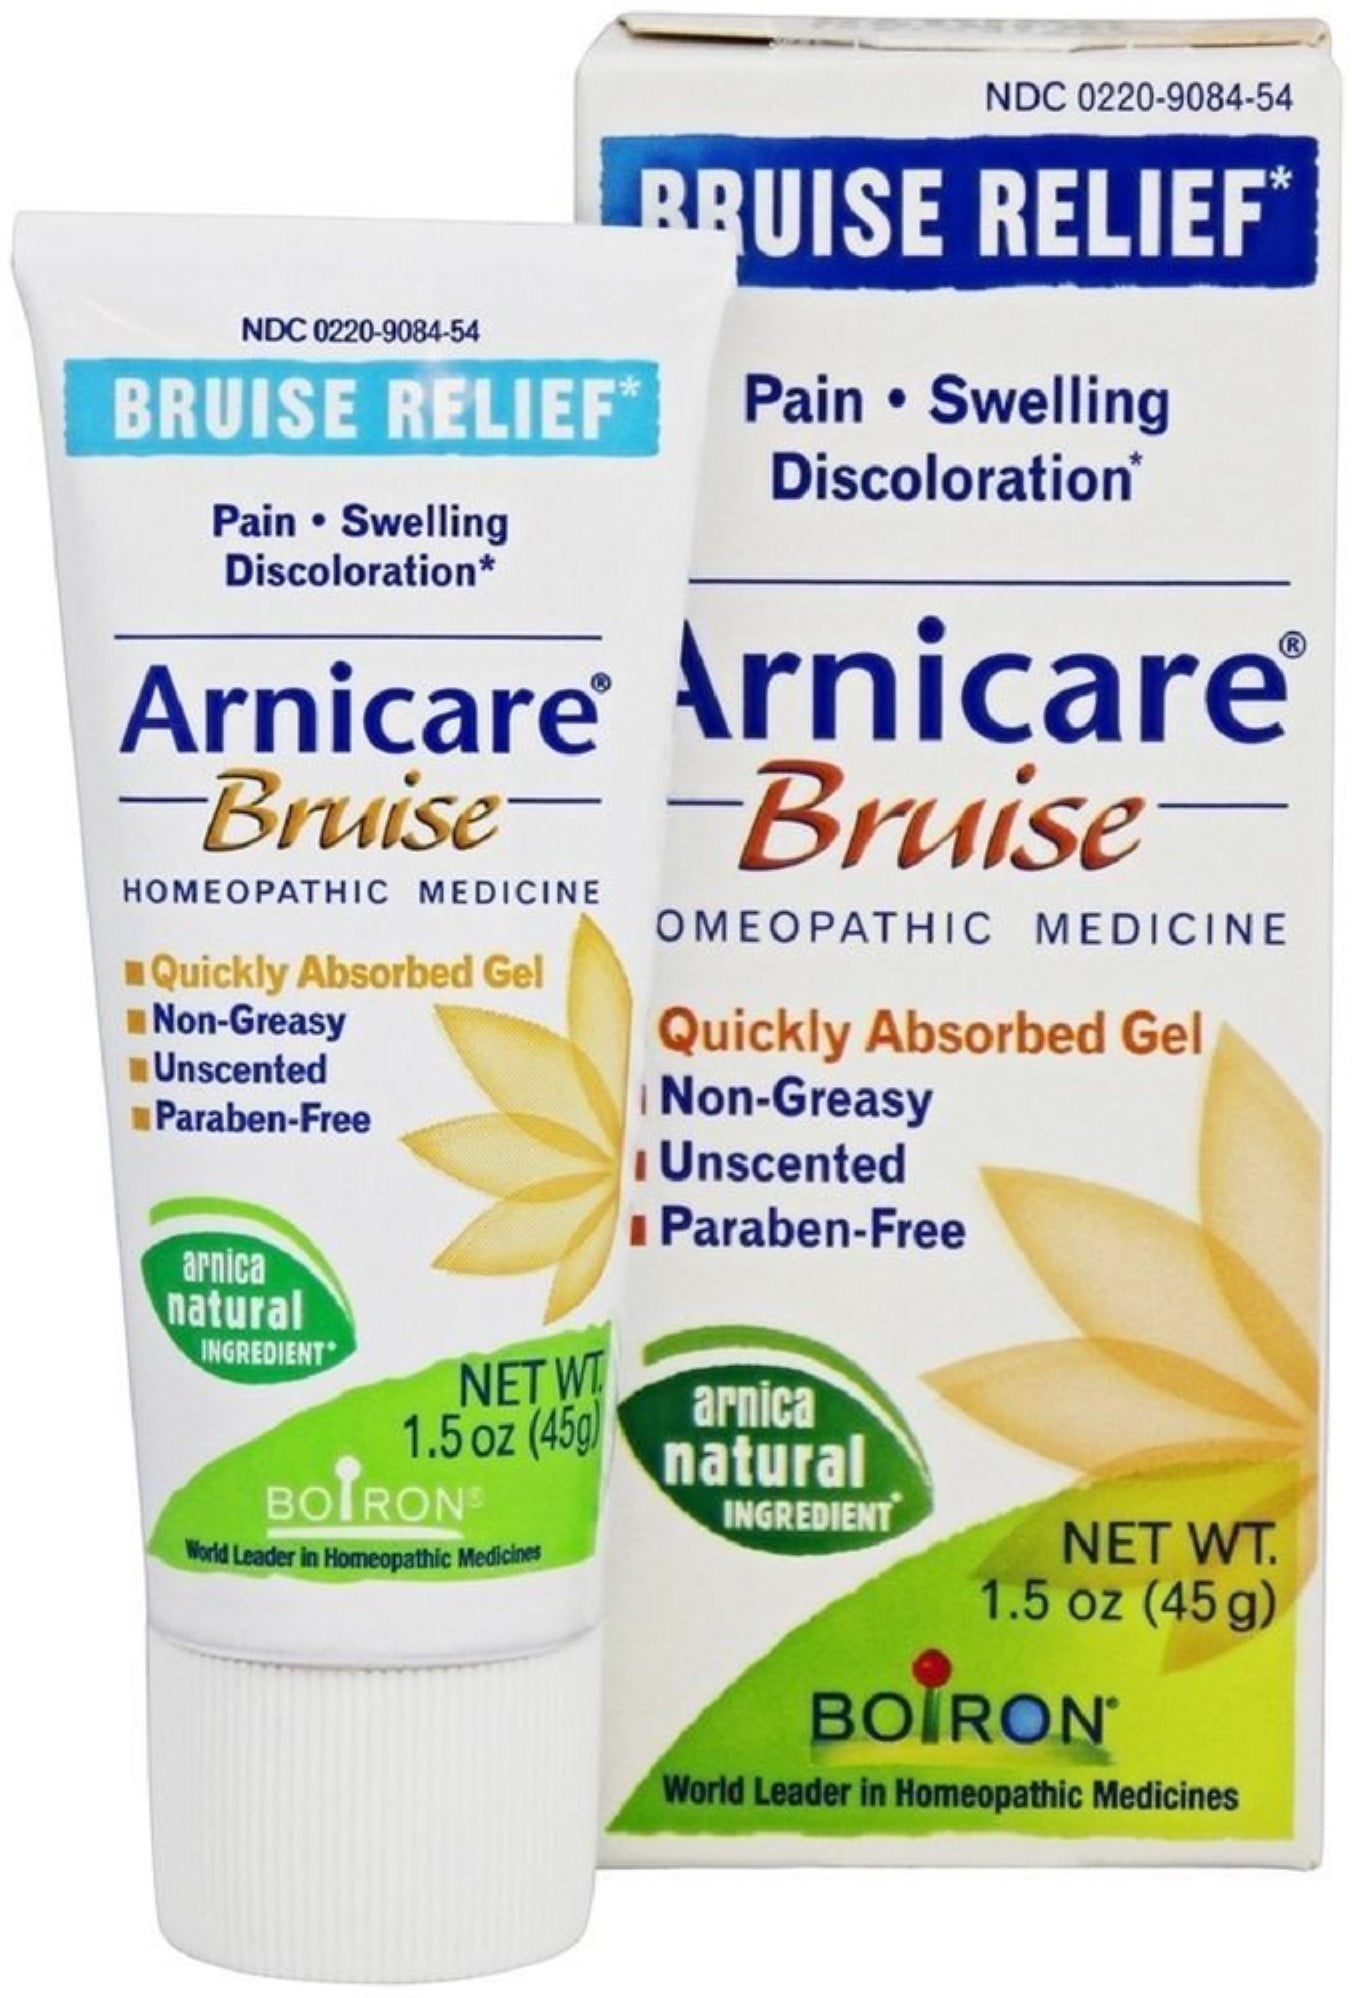 Arnica Gel for Bruising and Swelling Maximum Strength (98%) 16.9 Fl Oz for  Muscle and Joint Relief, Cool Effect, Dermatologically Tested and 98,7%  Natural - Dulc, Made in Italy 16.9 Fl Oz (Pack of 1)